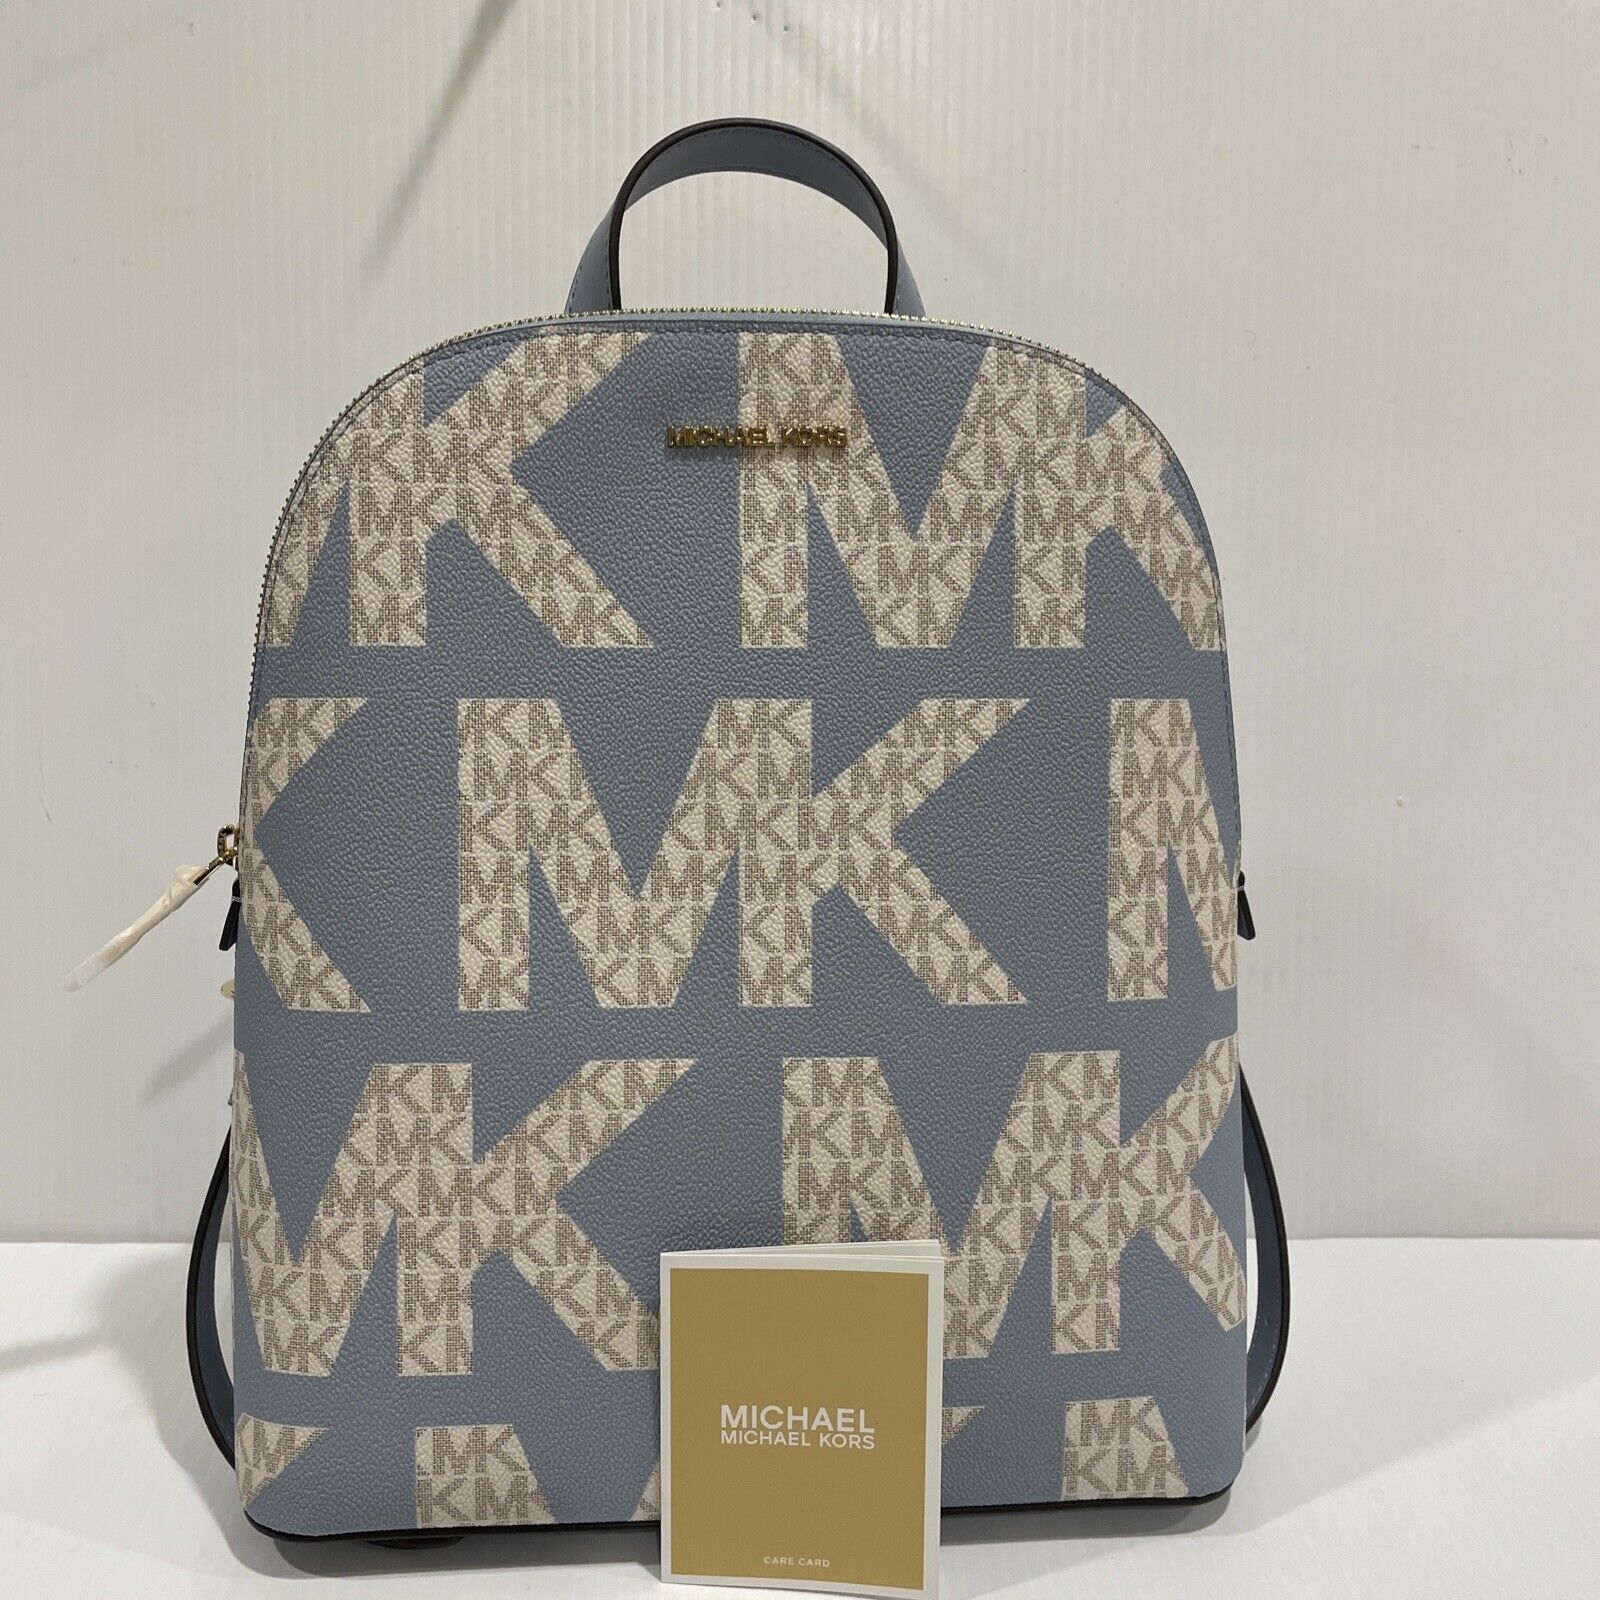 NWT $298 MICHAEL KORS CINDY LARGE GRAPHIC LOGO BACKPACK PALE BLUE MULTI